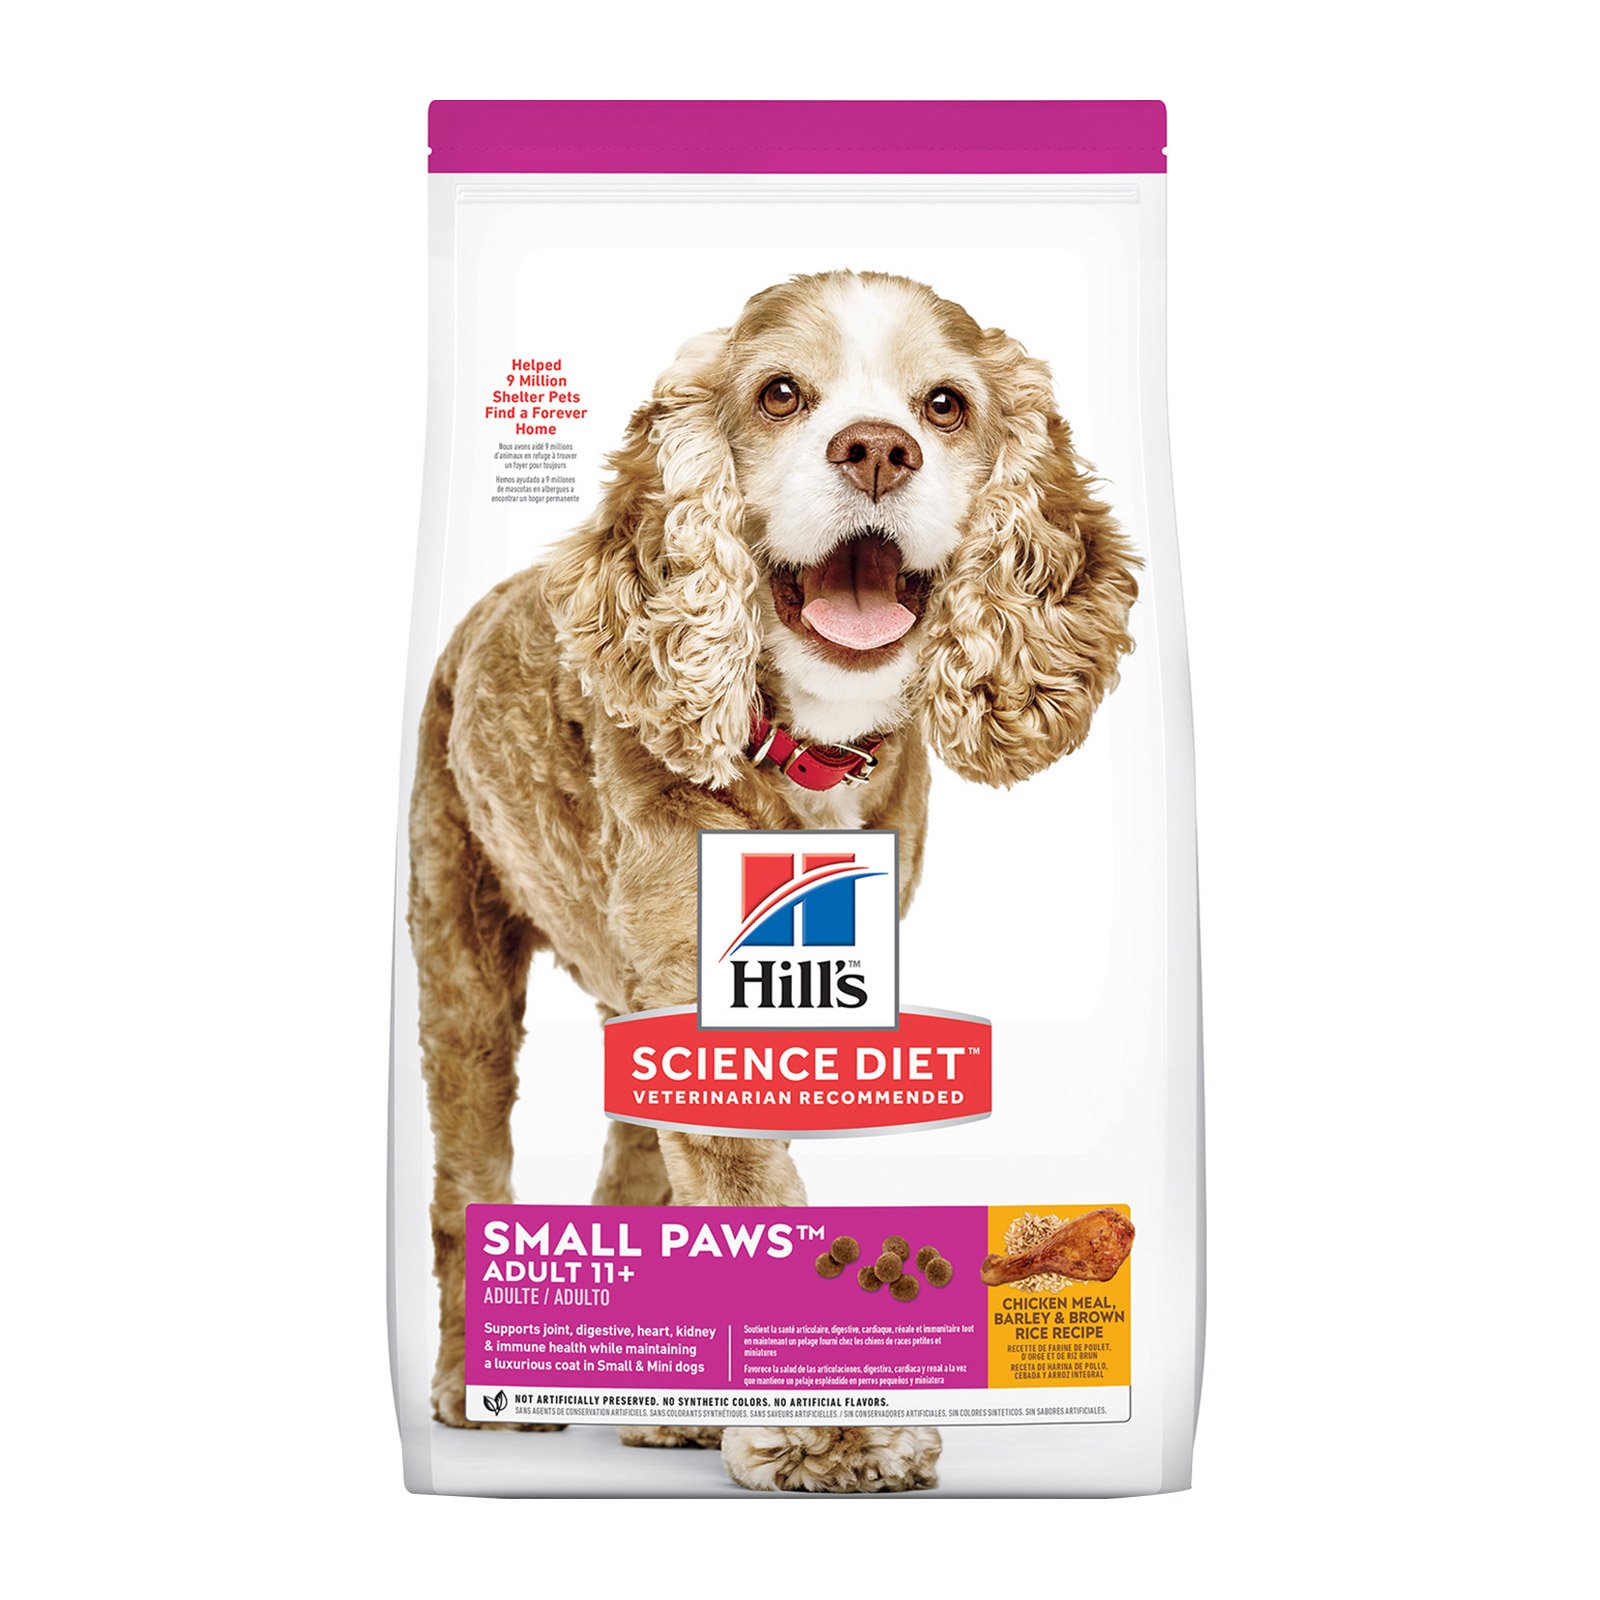 Hill's Science Diet Adult 11+ Small Paws Chicken, Barley & Rice Dry Dog Food